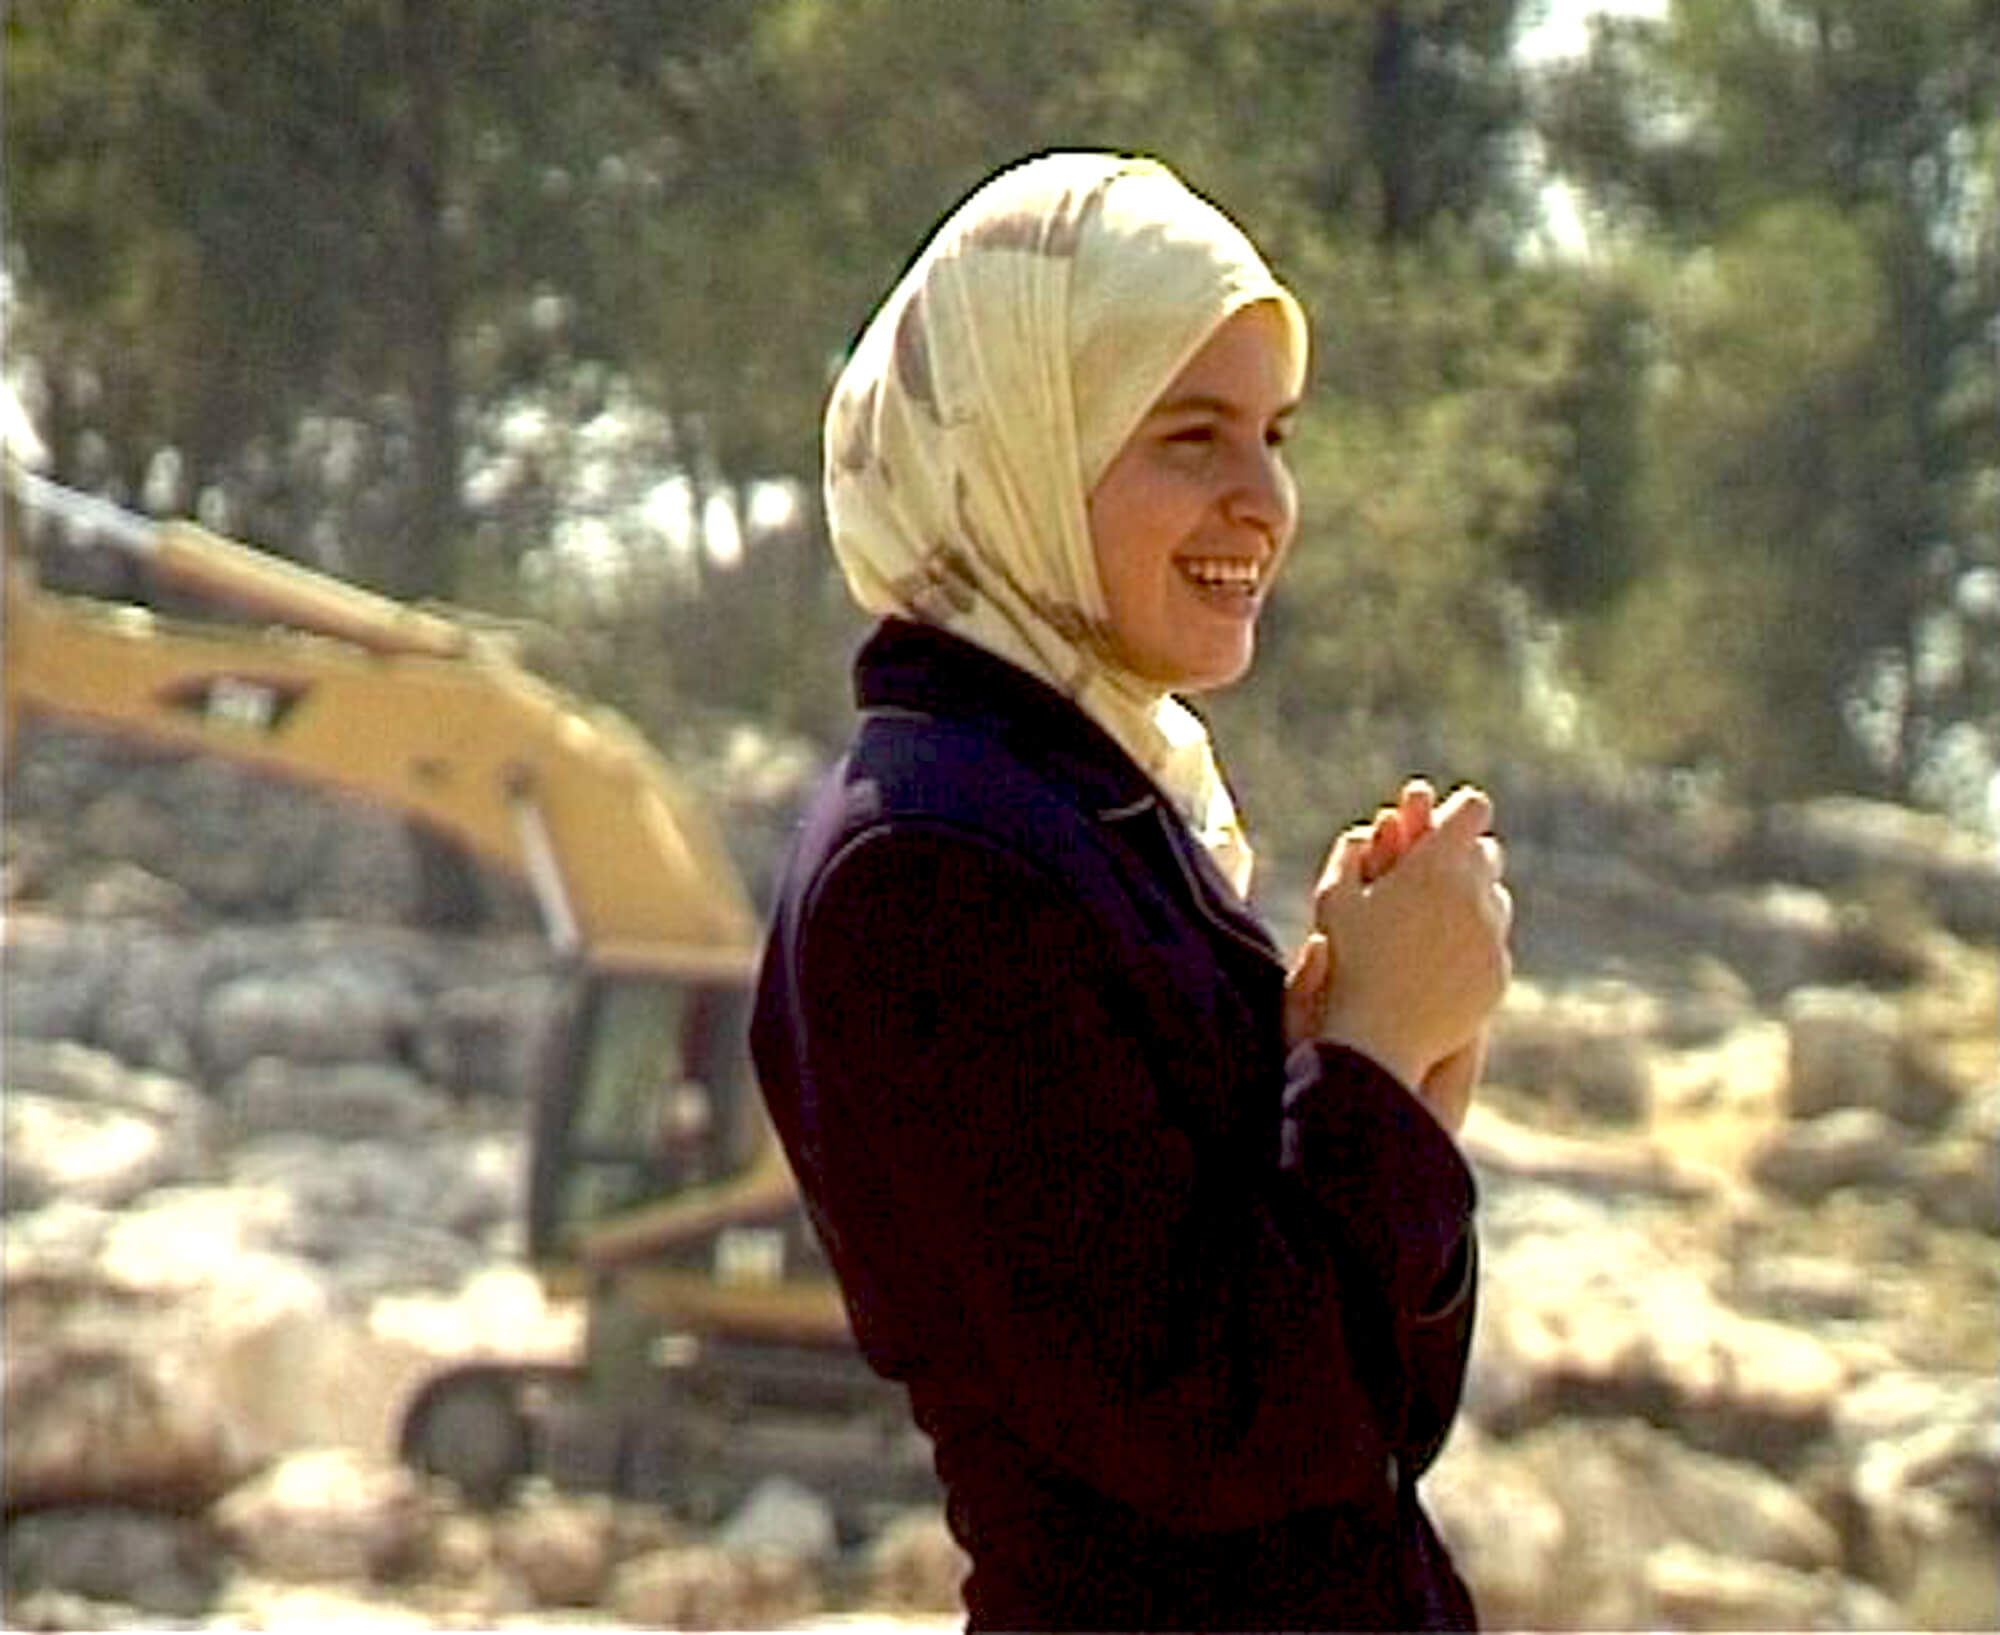 A woman is standing on a construction site, she is wearing a yellow hijad and holding her hands together in front of her chest.